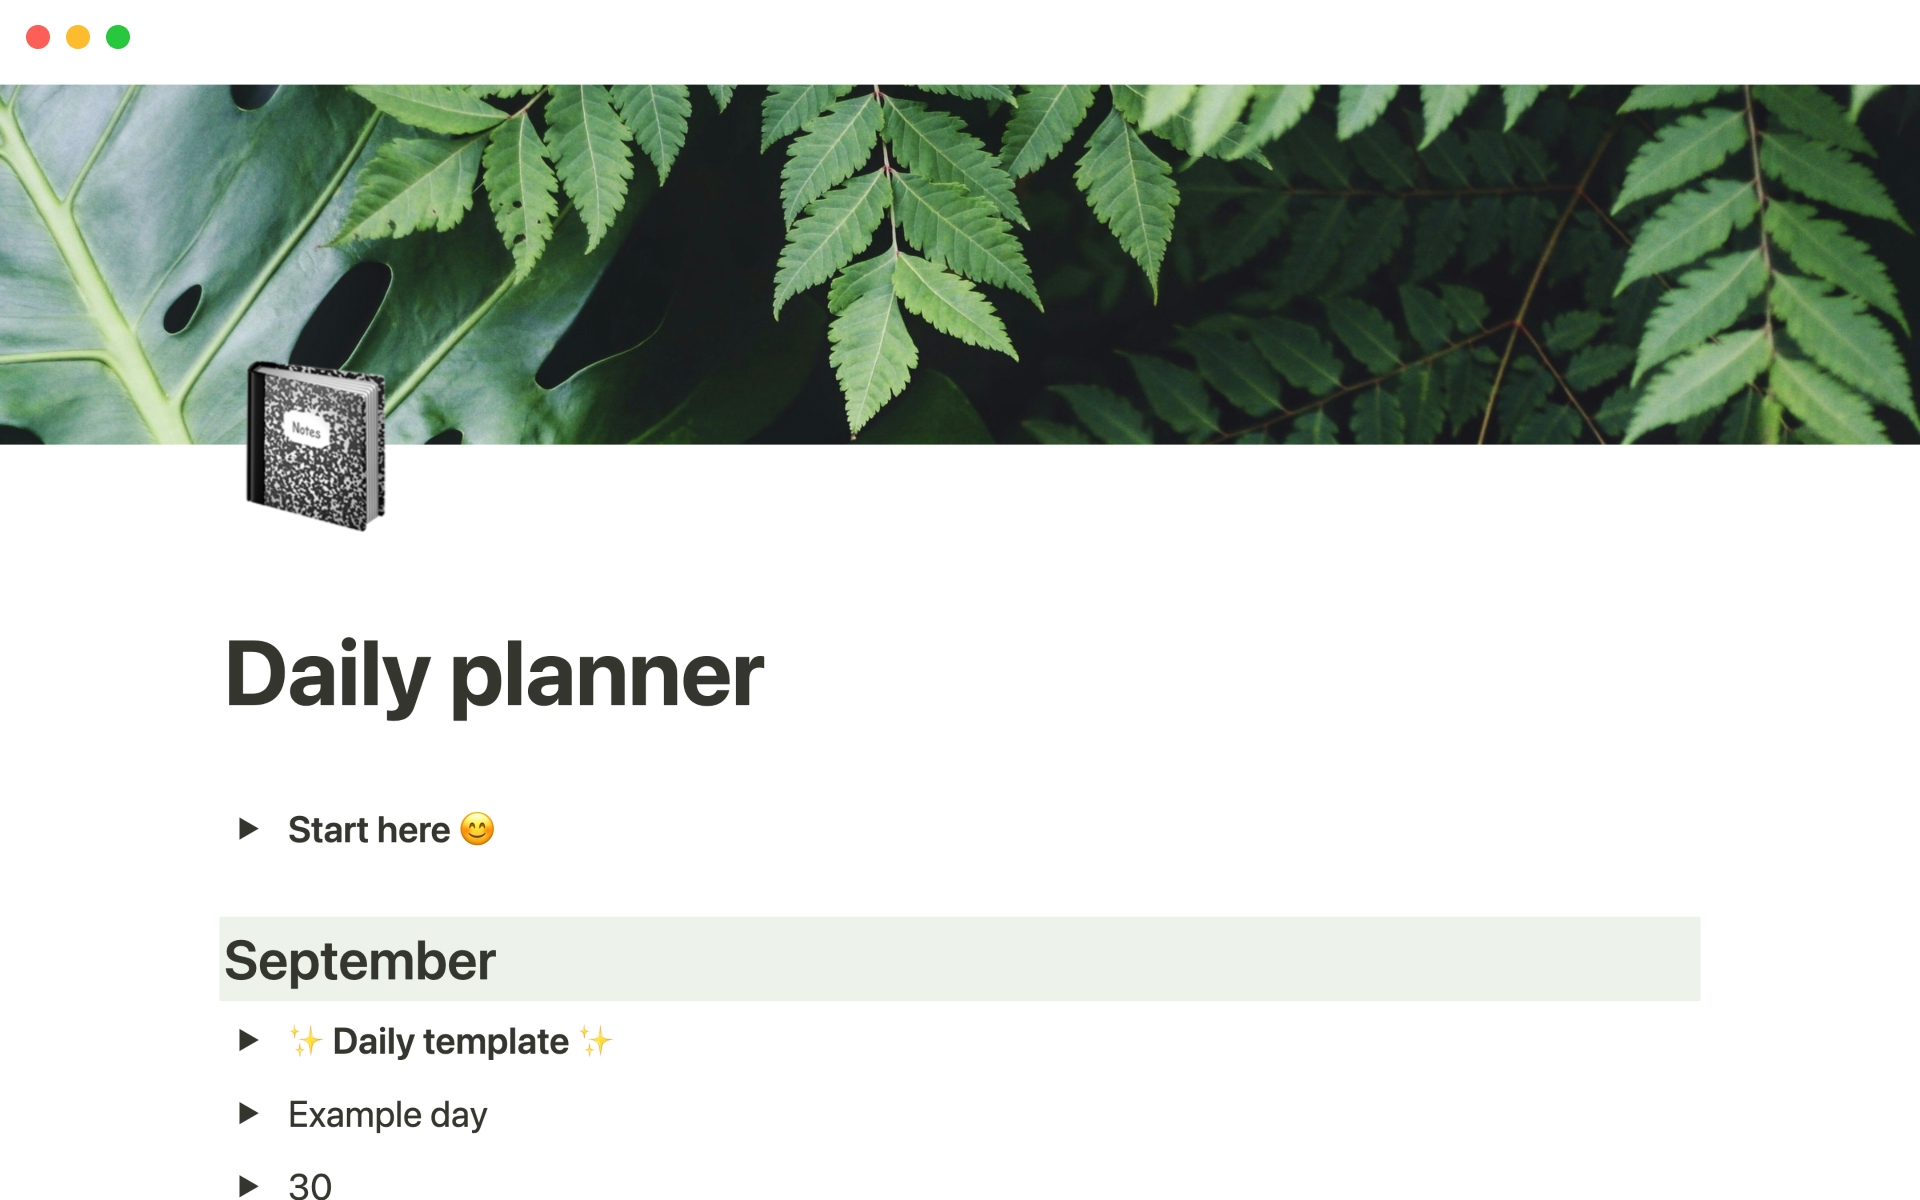 The desktop image for the Daily planner template